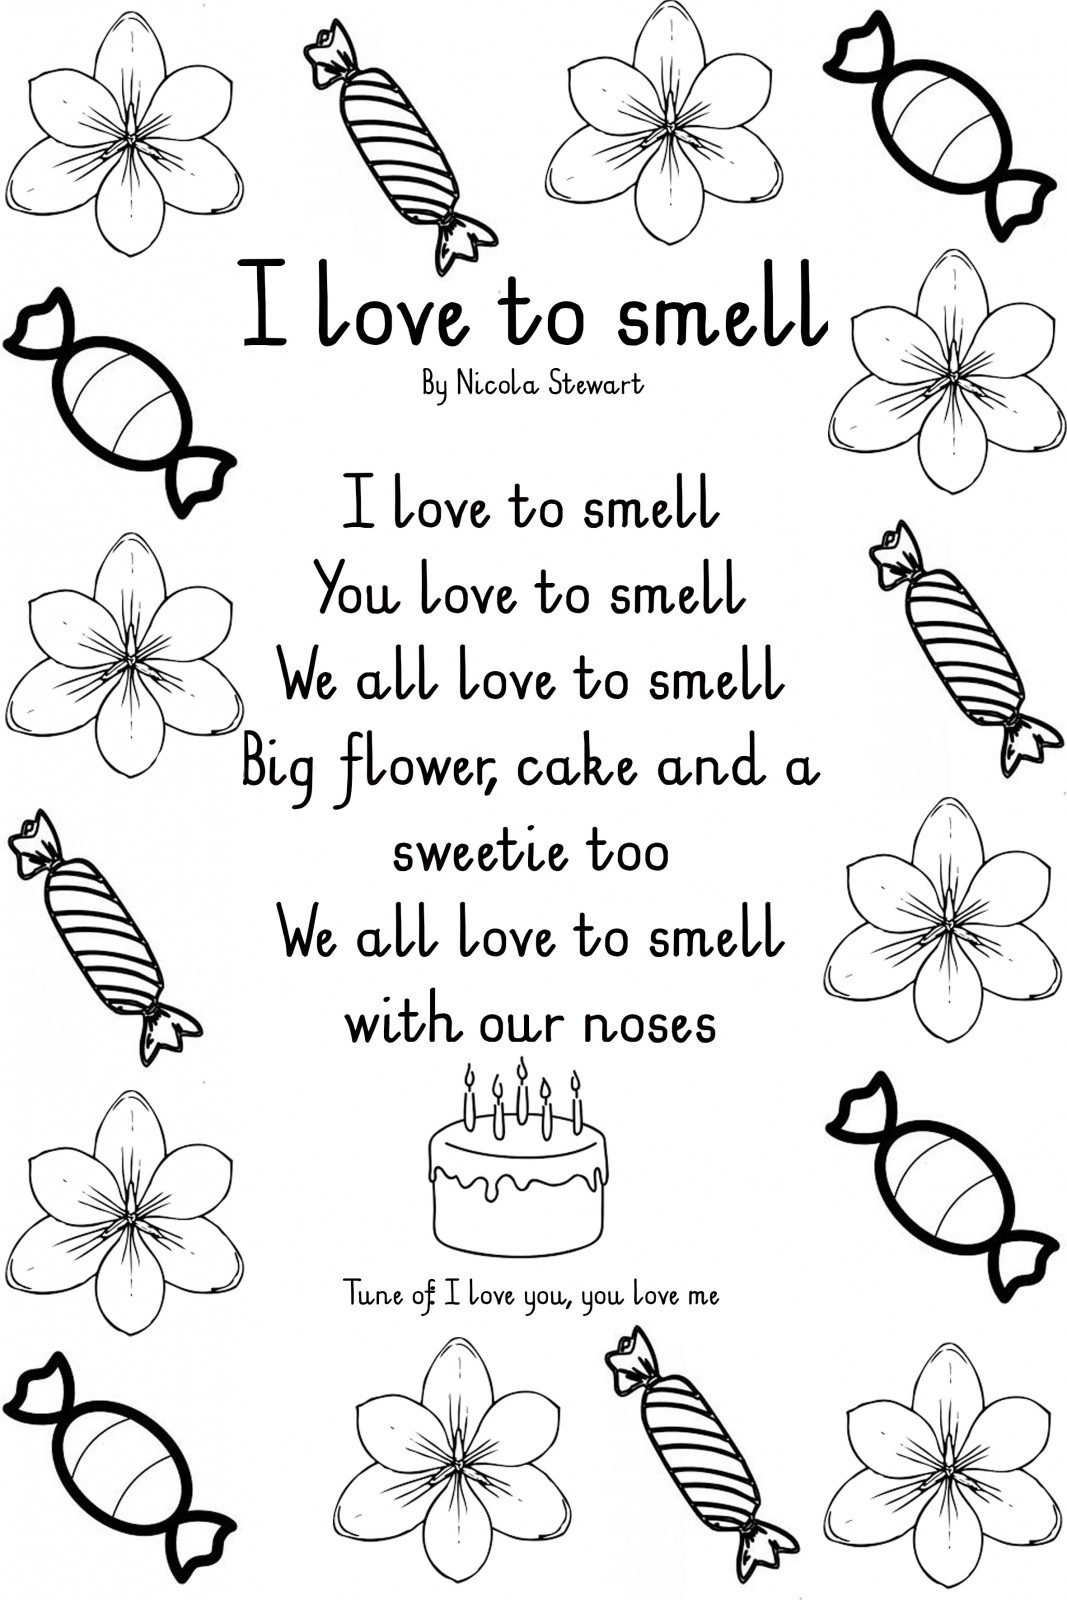 I love to smell by Nicola Stewart